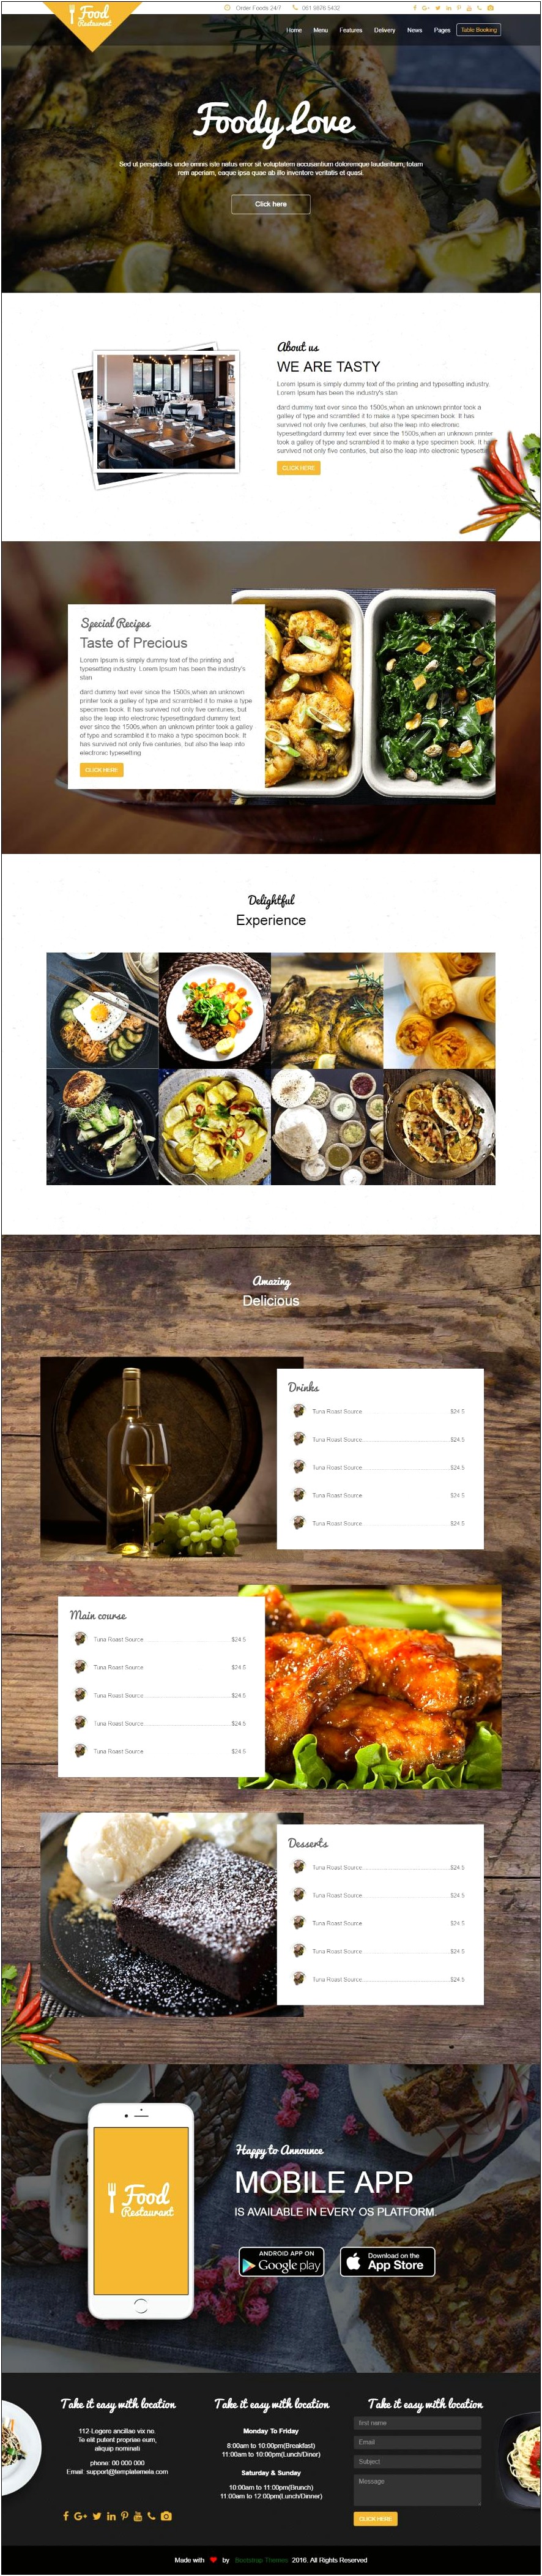 bootstrap-chinese-buffet-restaurant-free-templates-resume-example-gallery